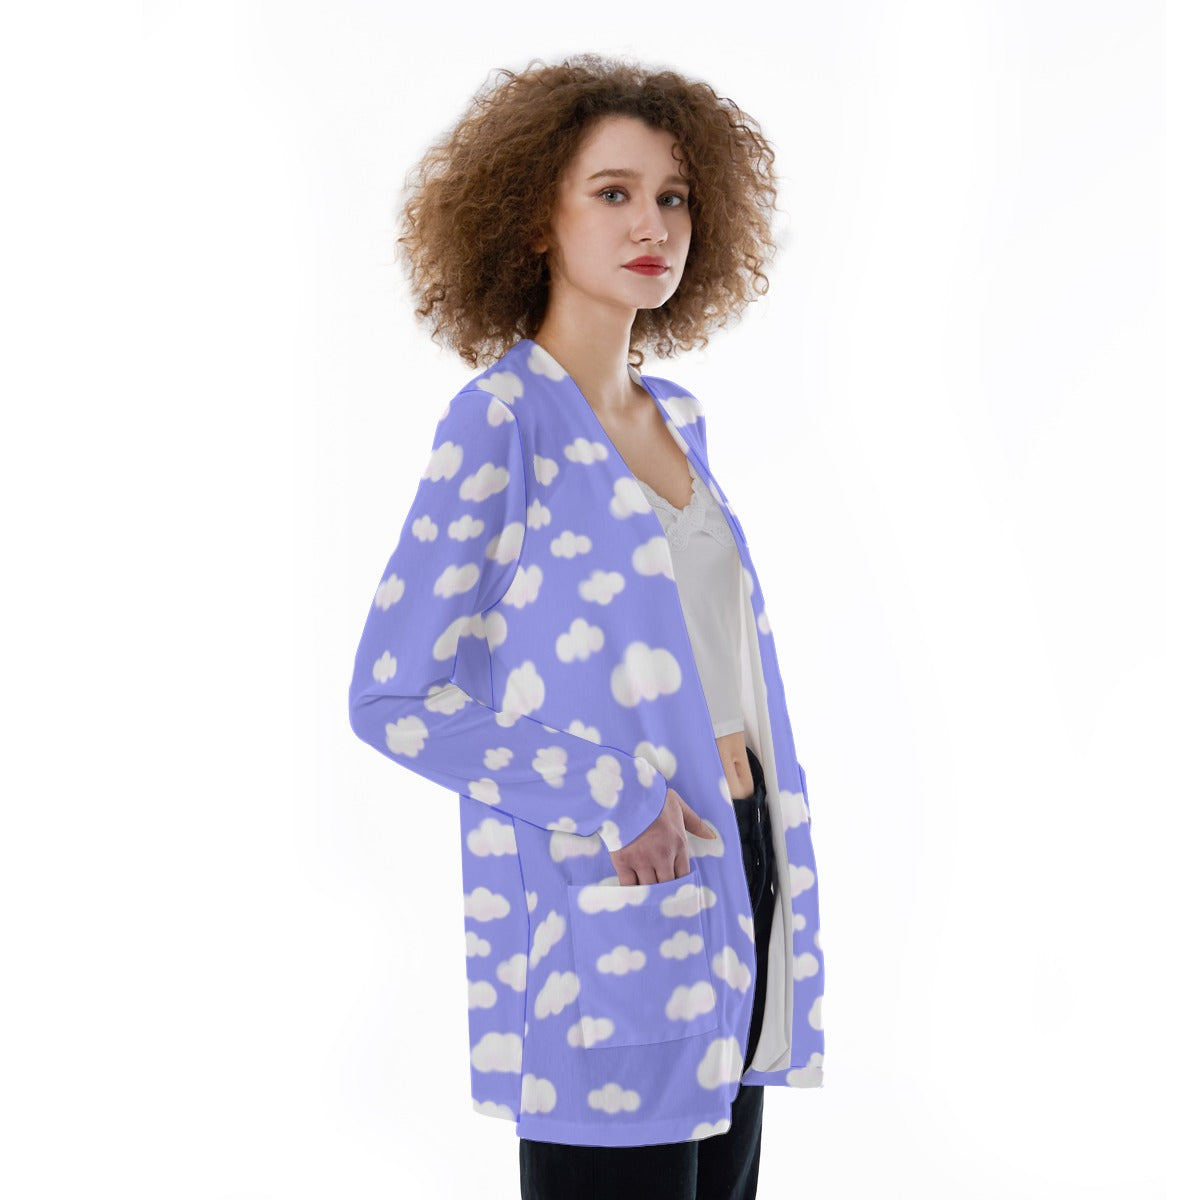 Dreamy Clouds Open Front Lightweight Cardigan With Pockets (Periwinkle)